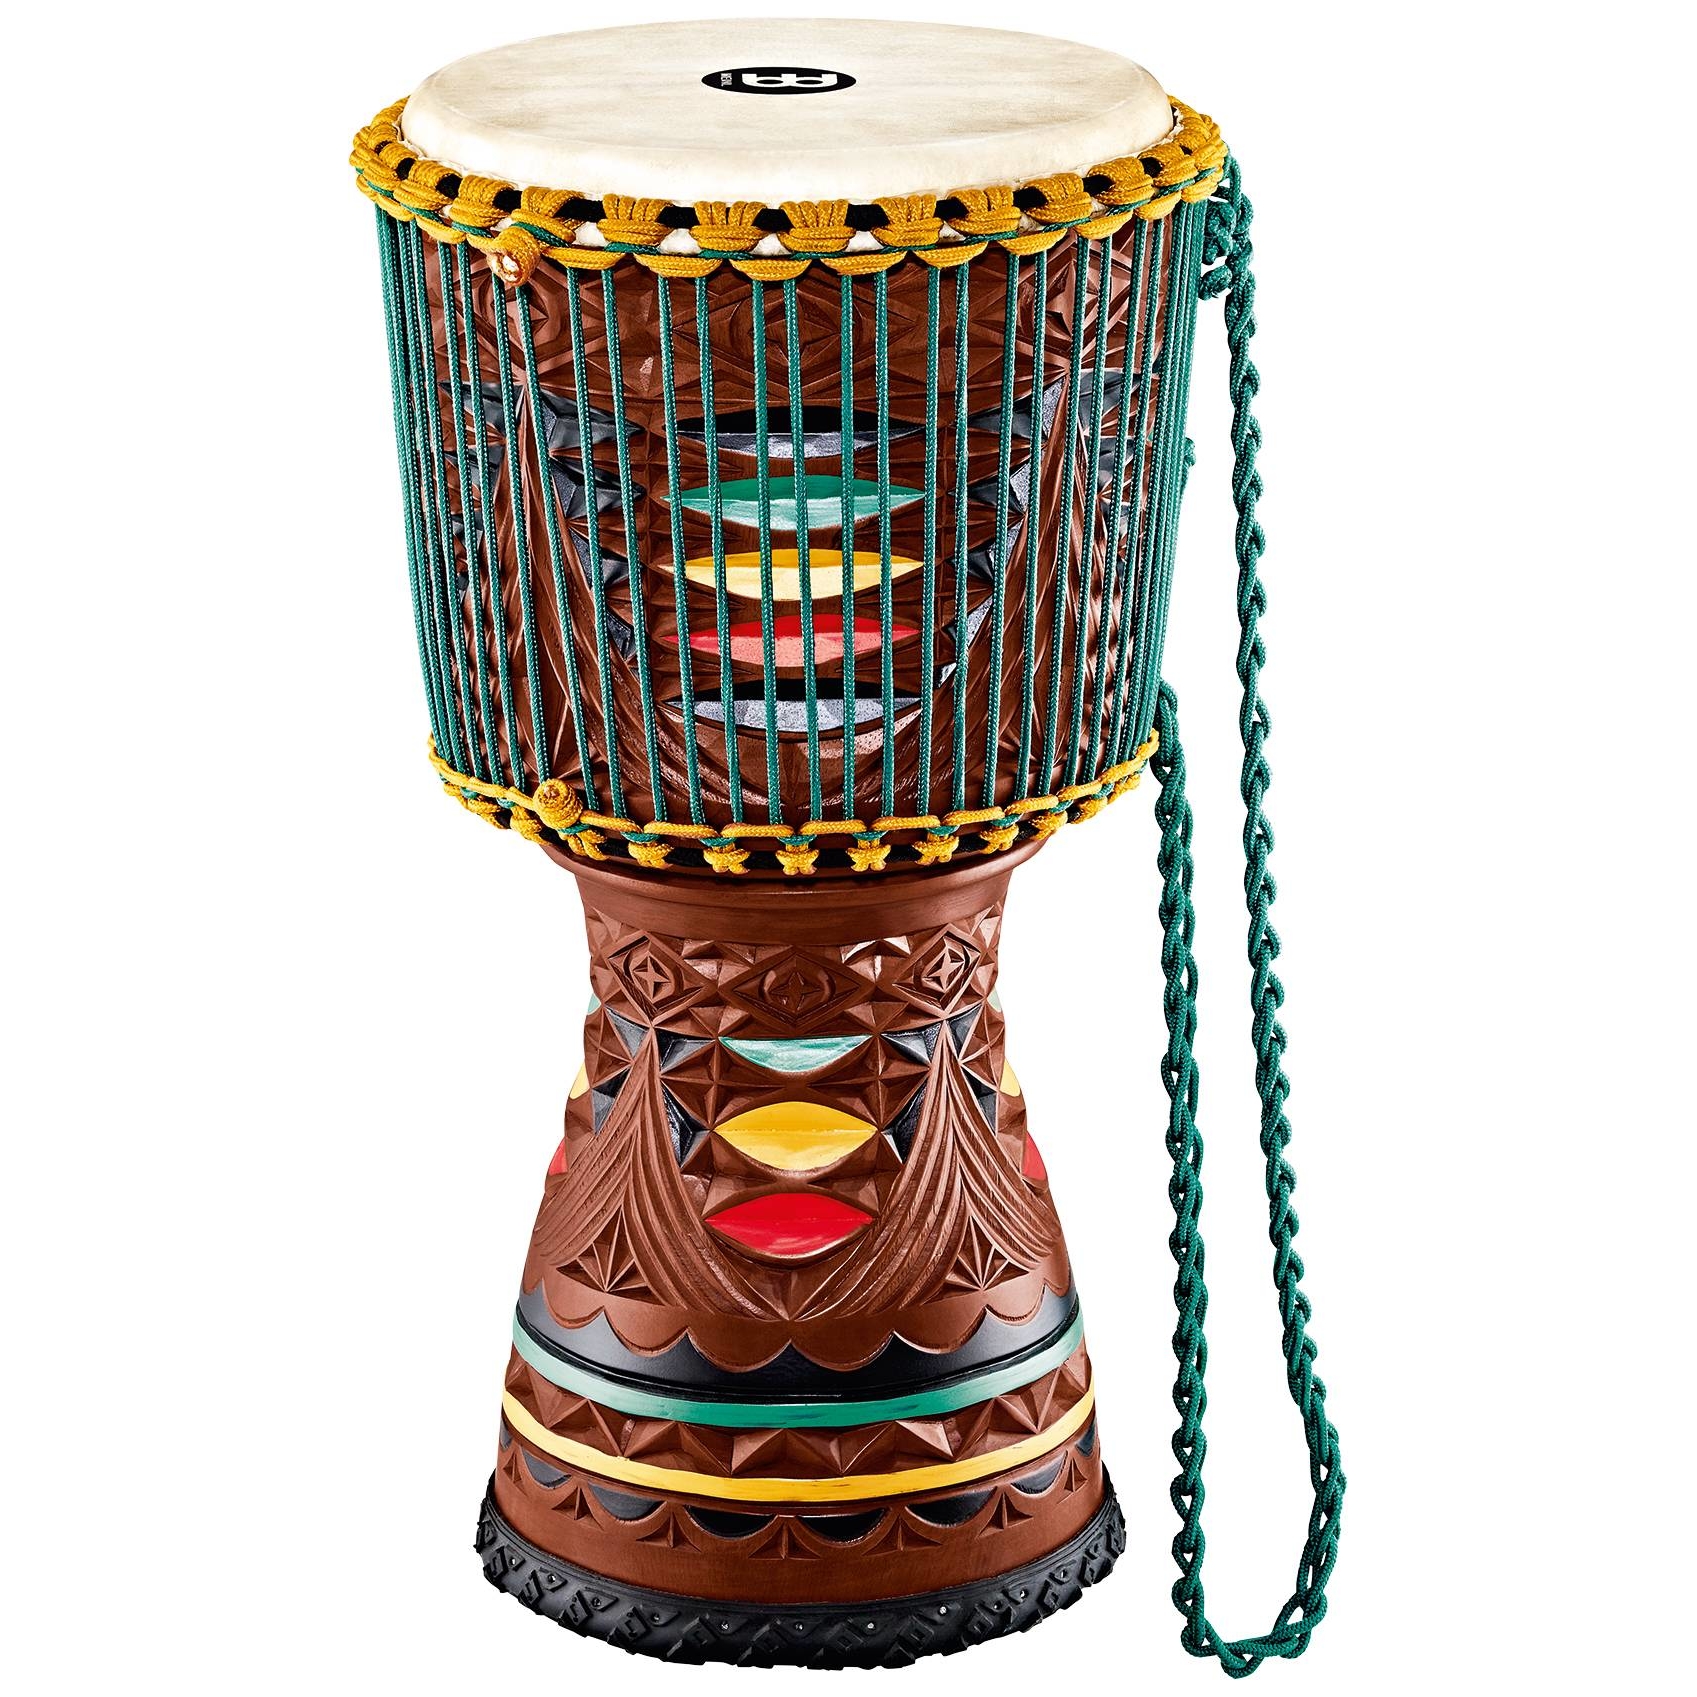 Meinl Percussion AE-DJTC2-L - 12" Artisan Edition Tongo Carved Djembe, Coloured Carving